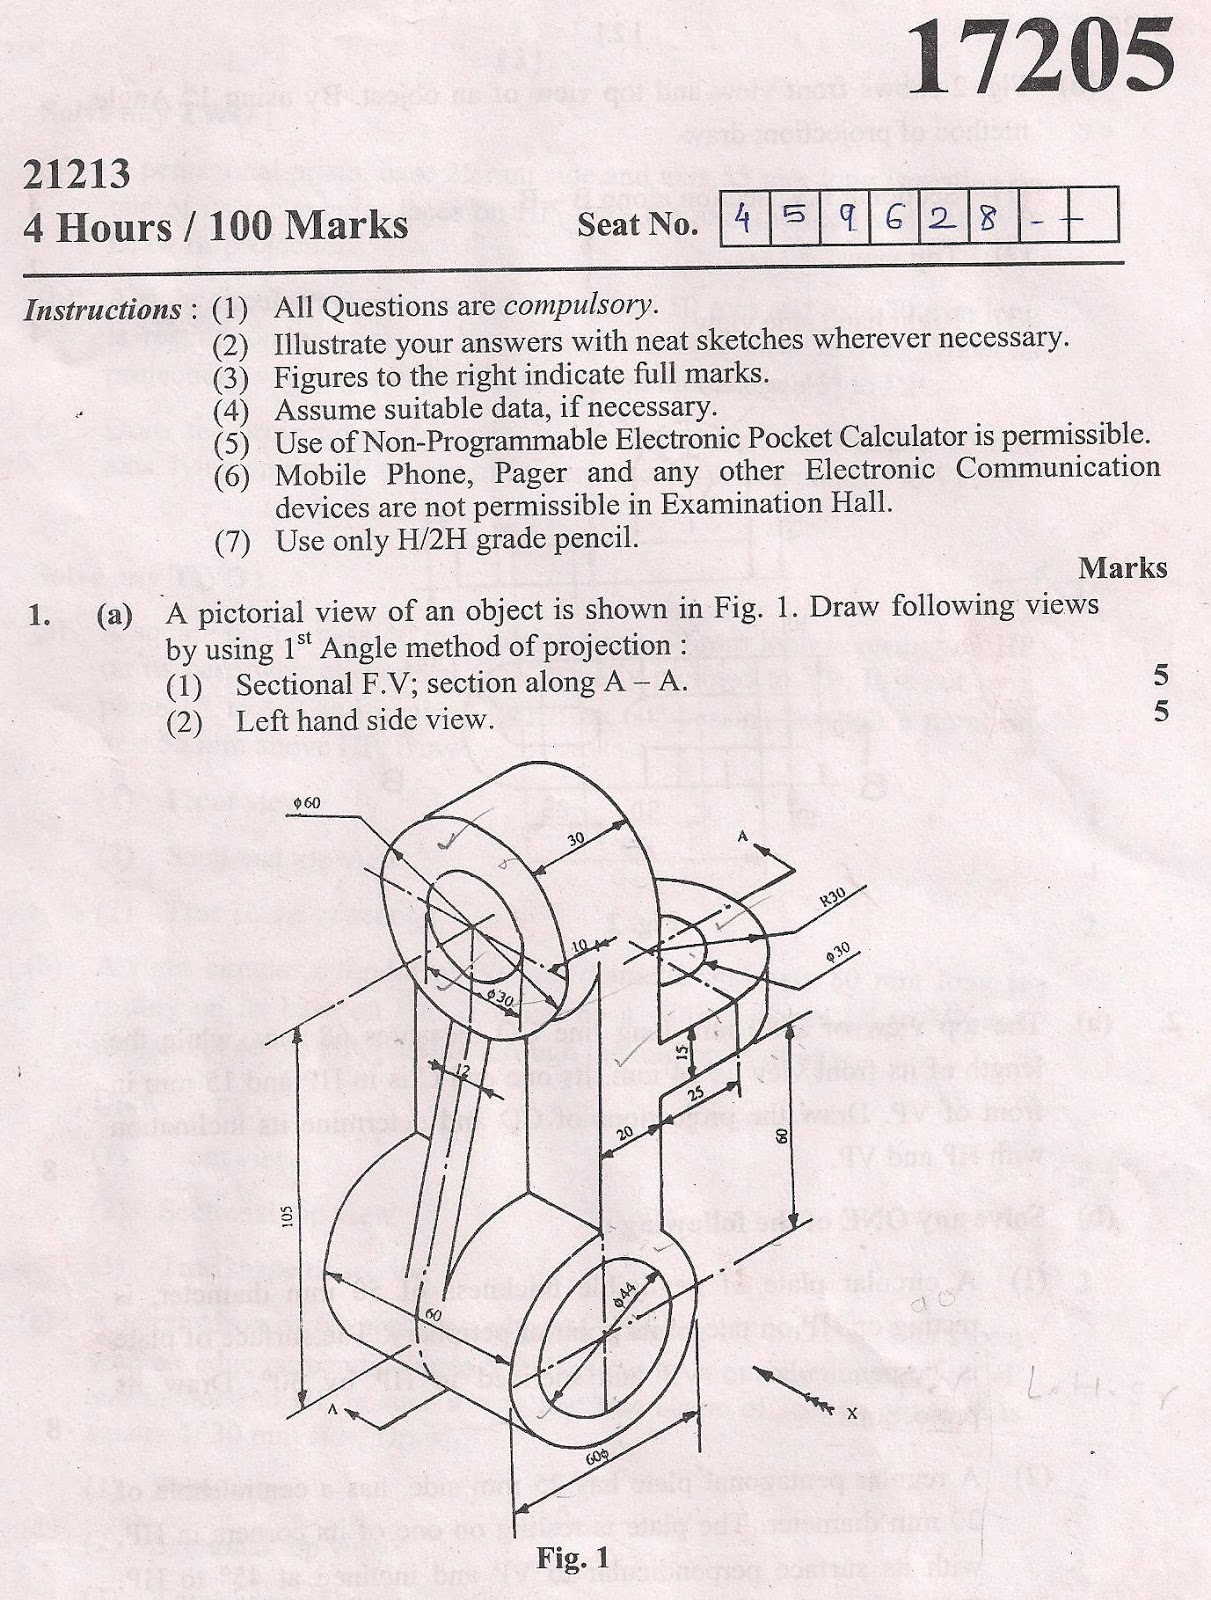 MSBTE 17205 Engineering Drawing 2013 Question Paper Images 